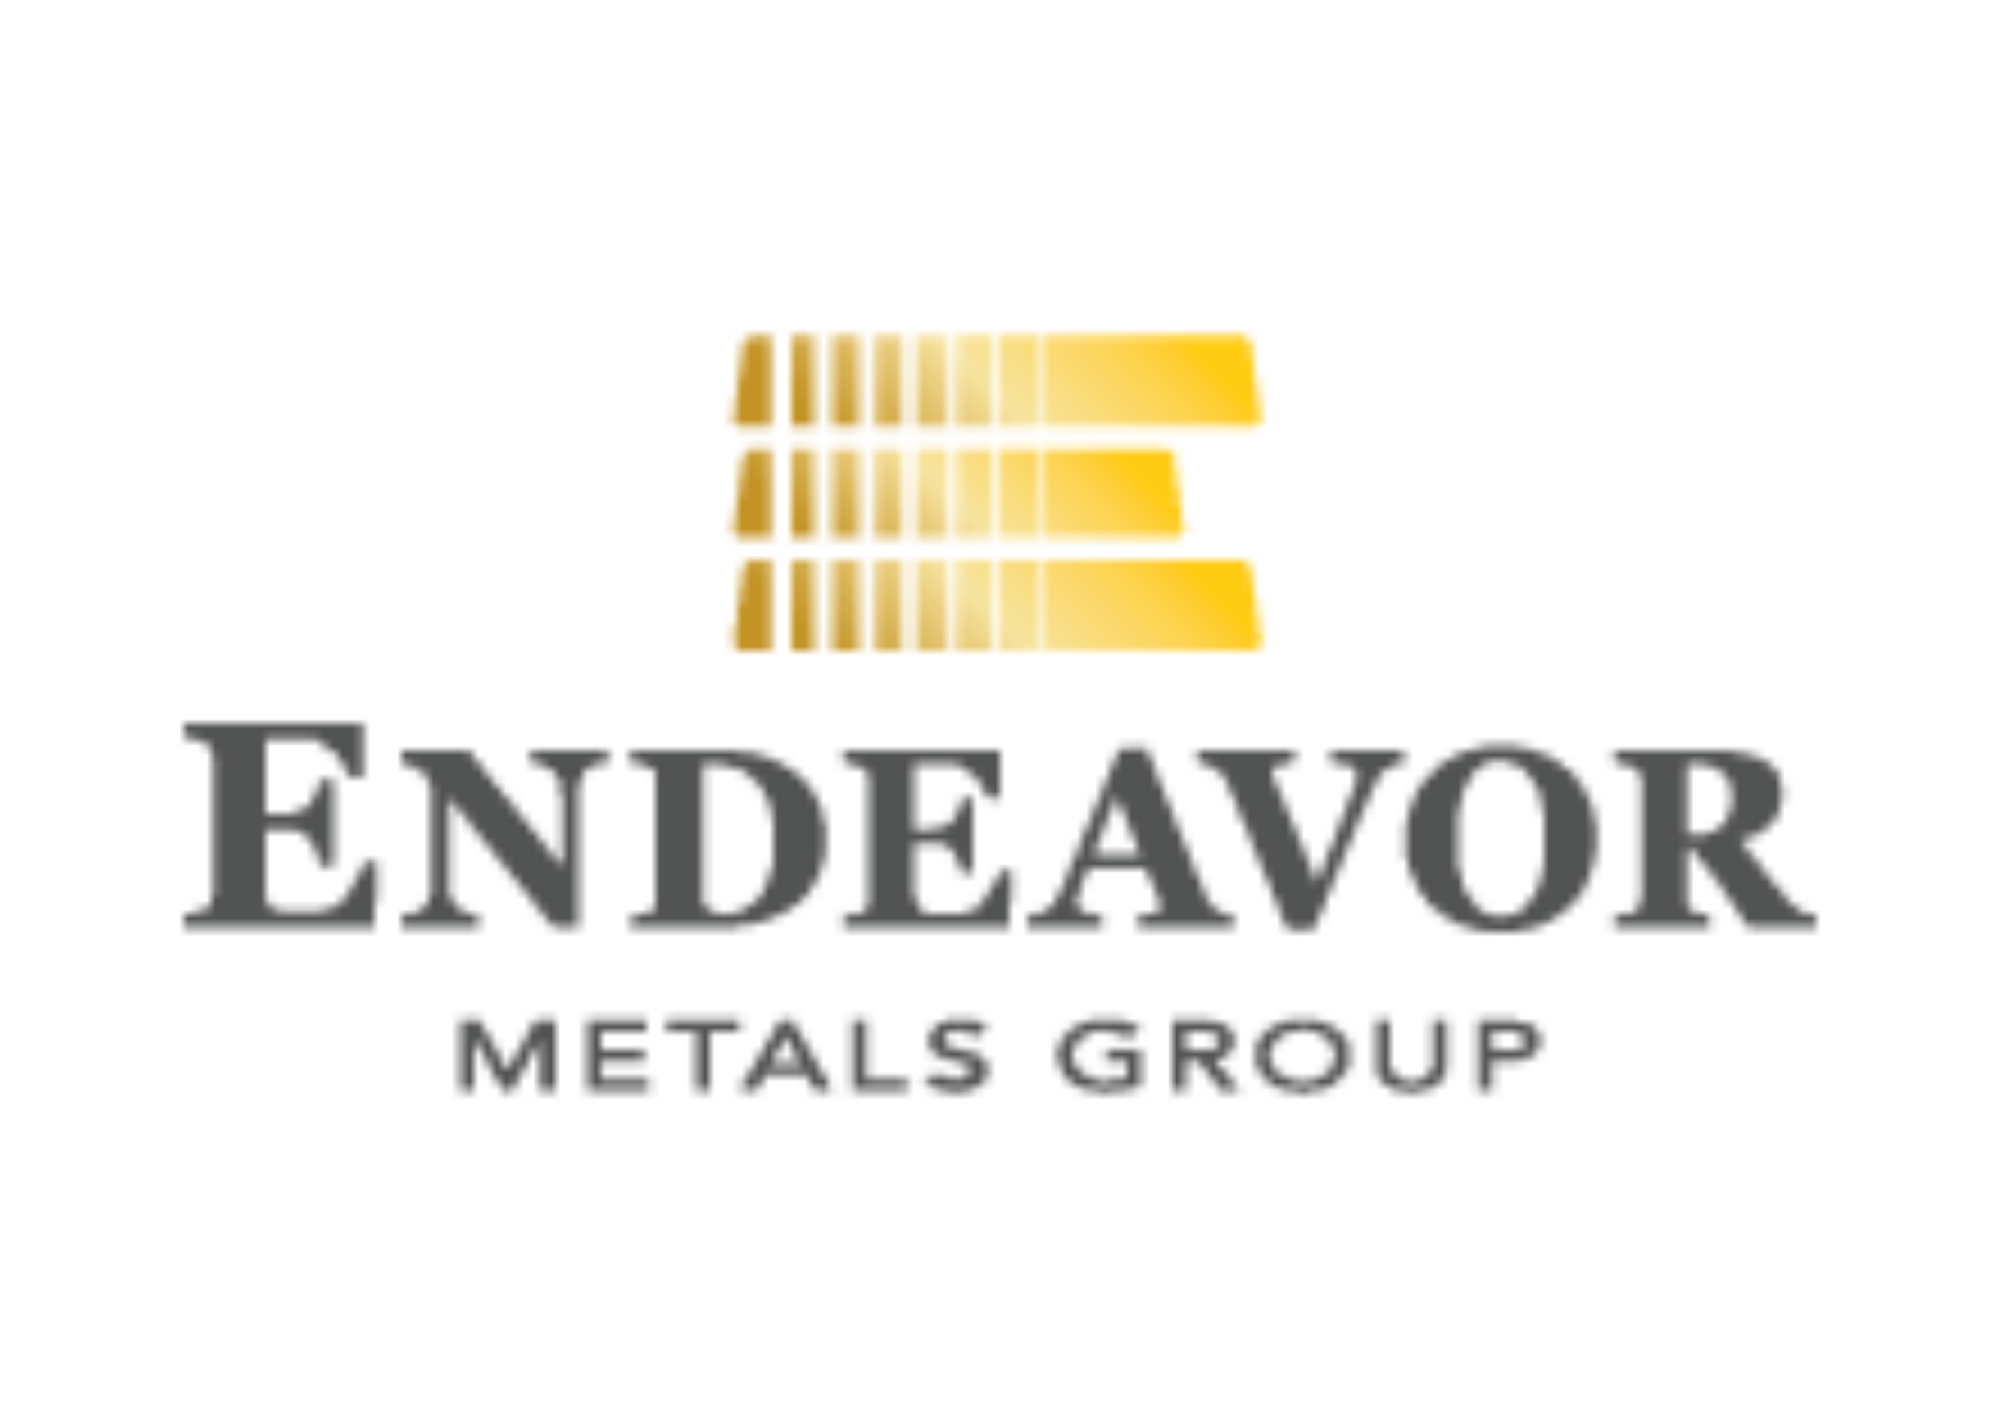 Endeavor Metals Group, Monday, August 22, 2022, Press release picture